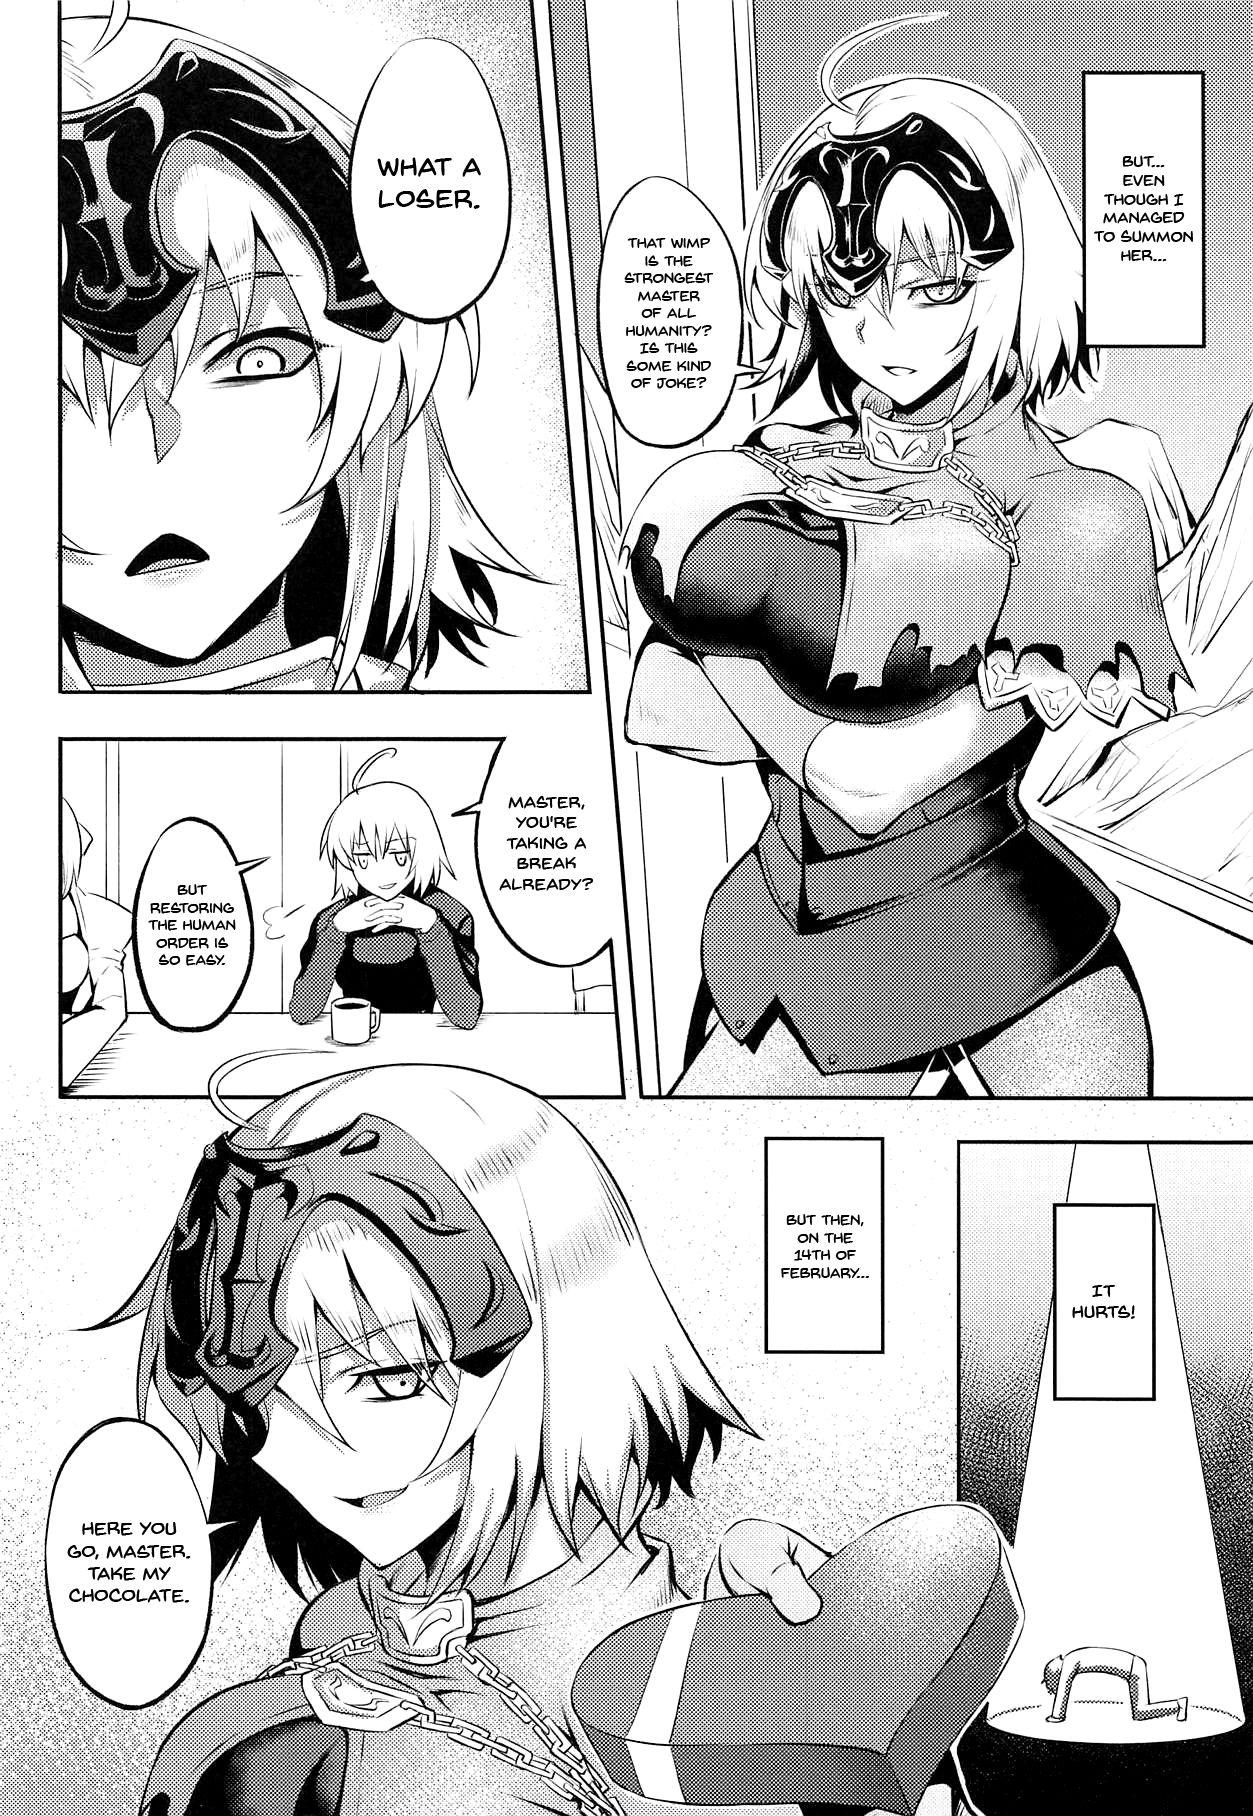 Smooth Sugao no Mama no Kimi de Ite | Together With You Showing Her True Face - Fate grand order Casero - Page 4